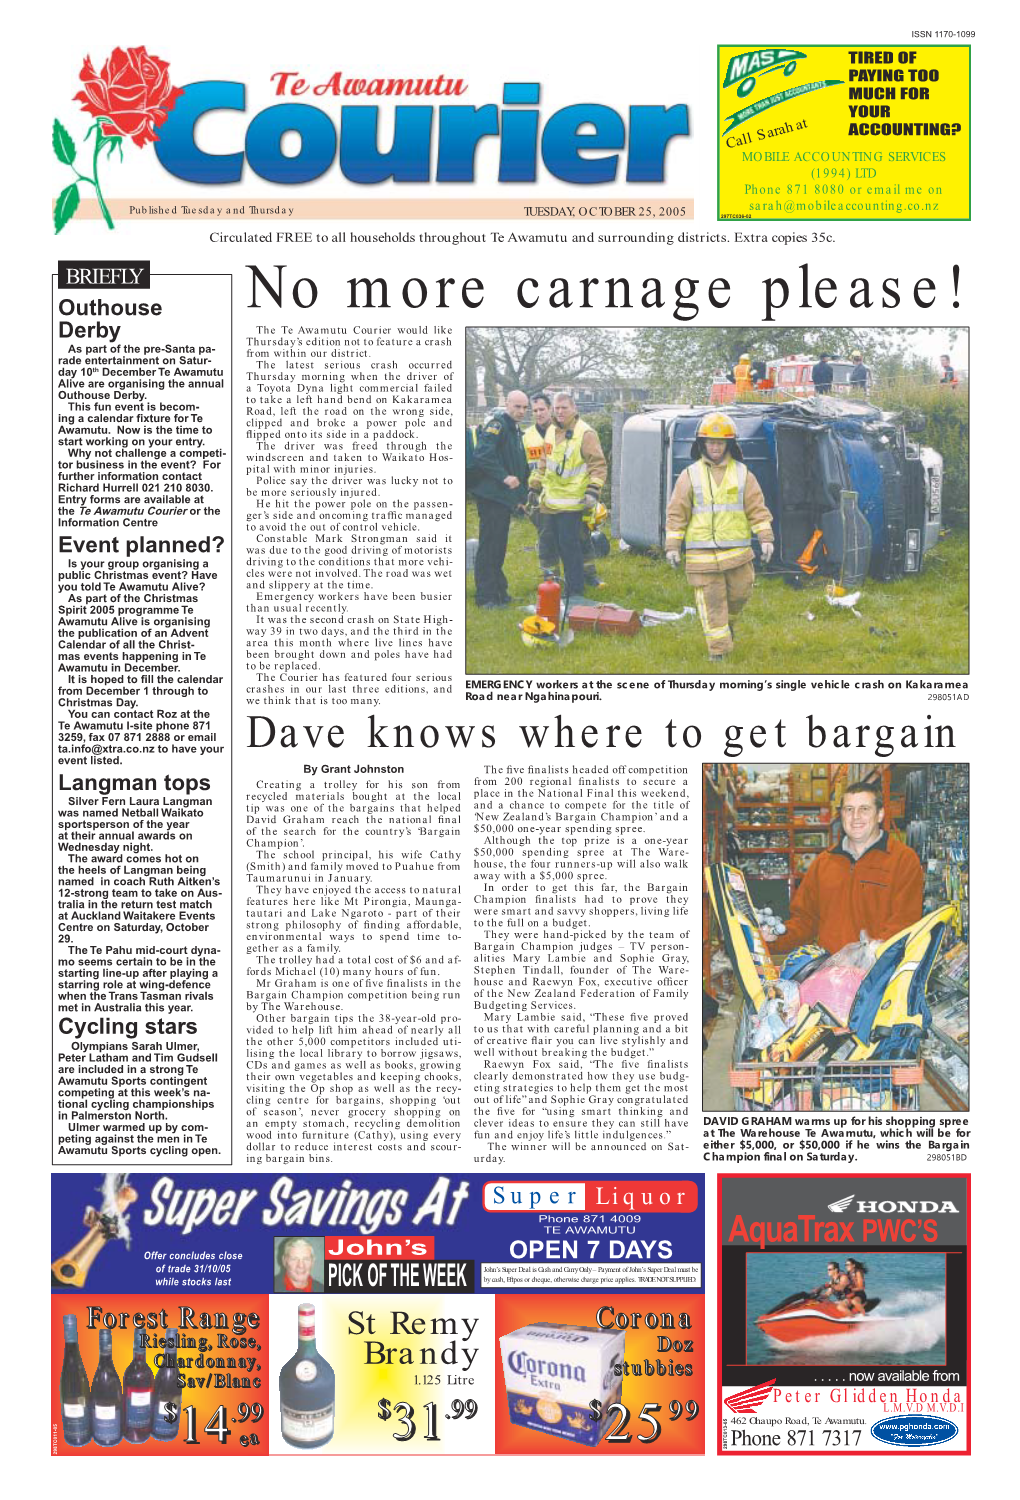 Te Awamutu Courier Would Like Derby Thursday’S Edition Not to Feature a Crash As Part of the Pre-Santa Pa- from Within Our District